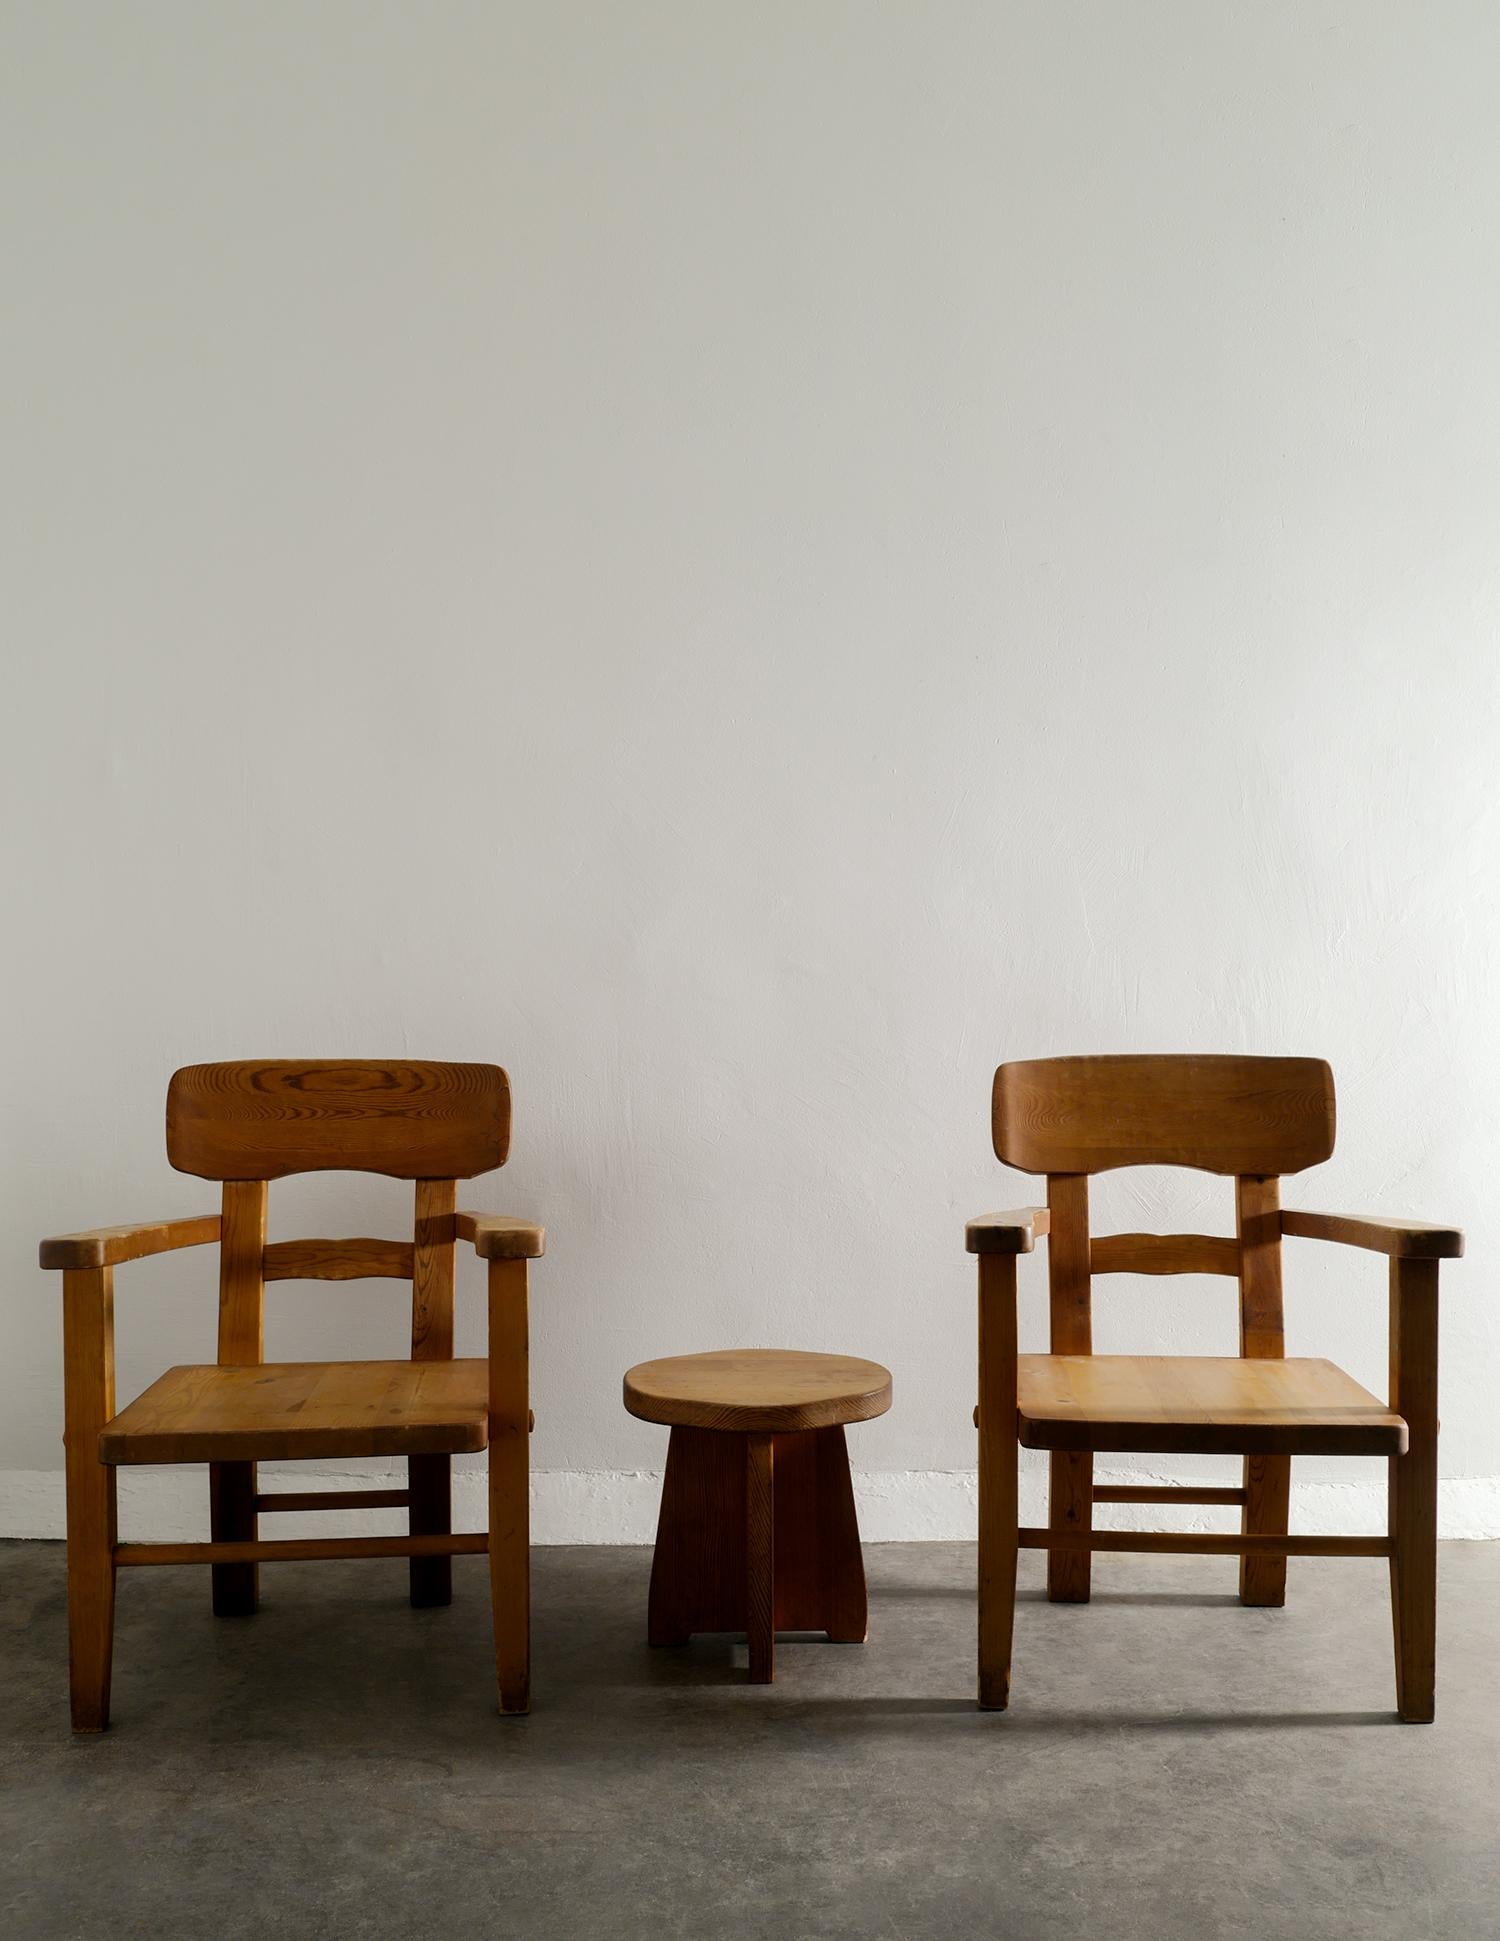 Scandinavian Modern Pair of Swedish Brutalist Armchairs in Stained Pine Produced by Vemdalia, 1970s For Sale